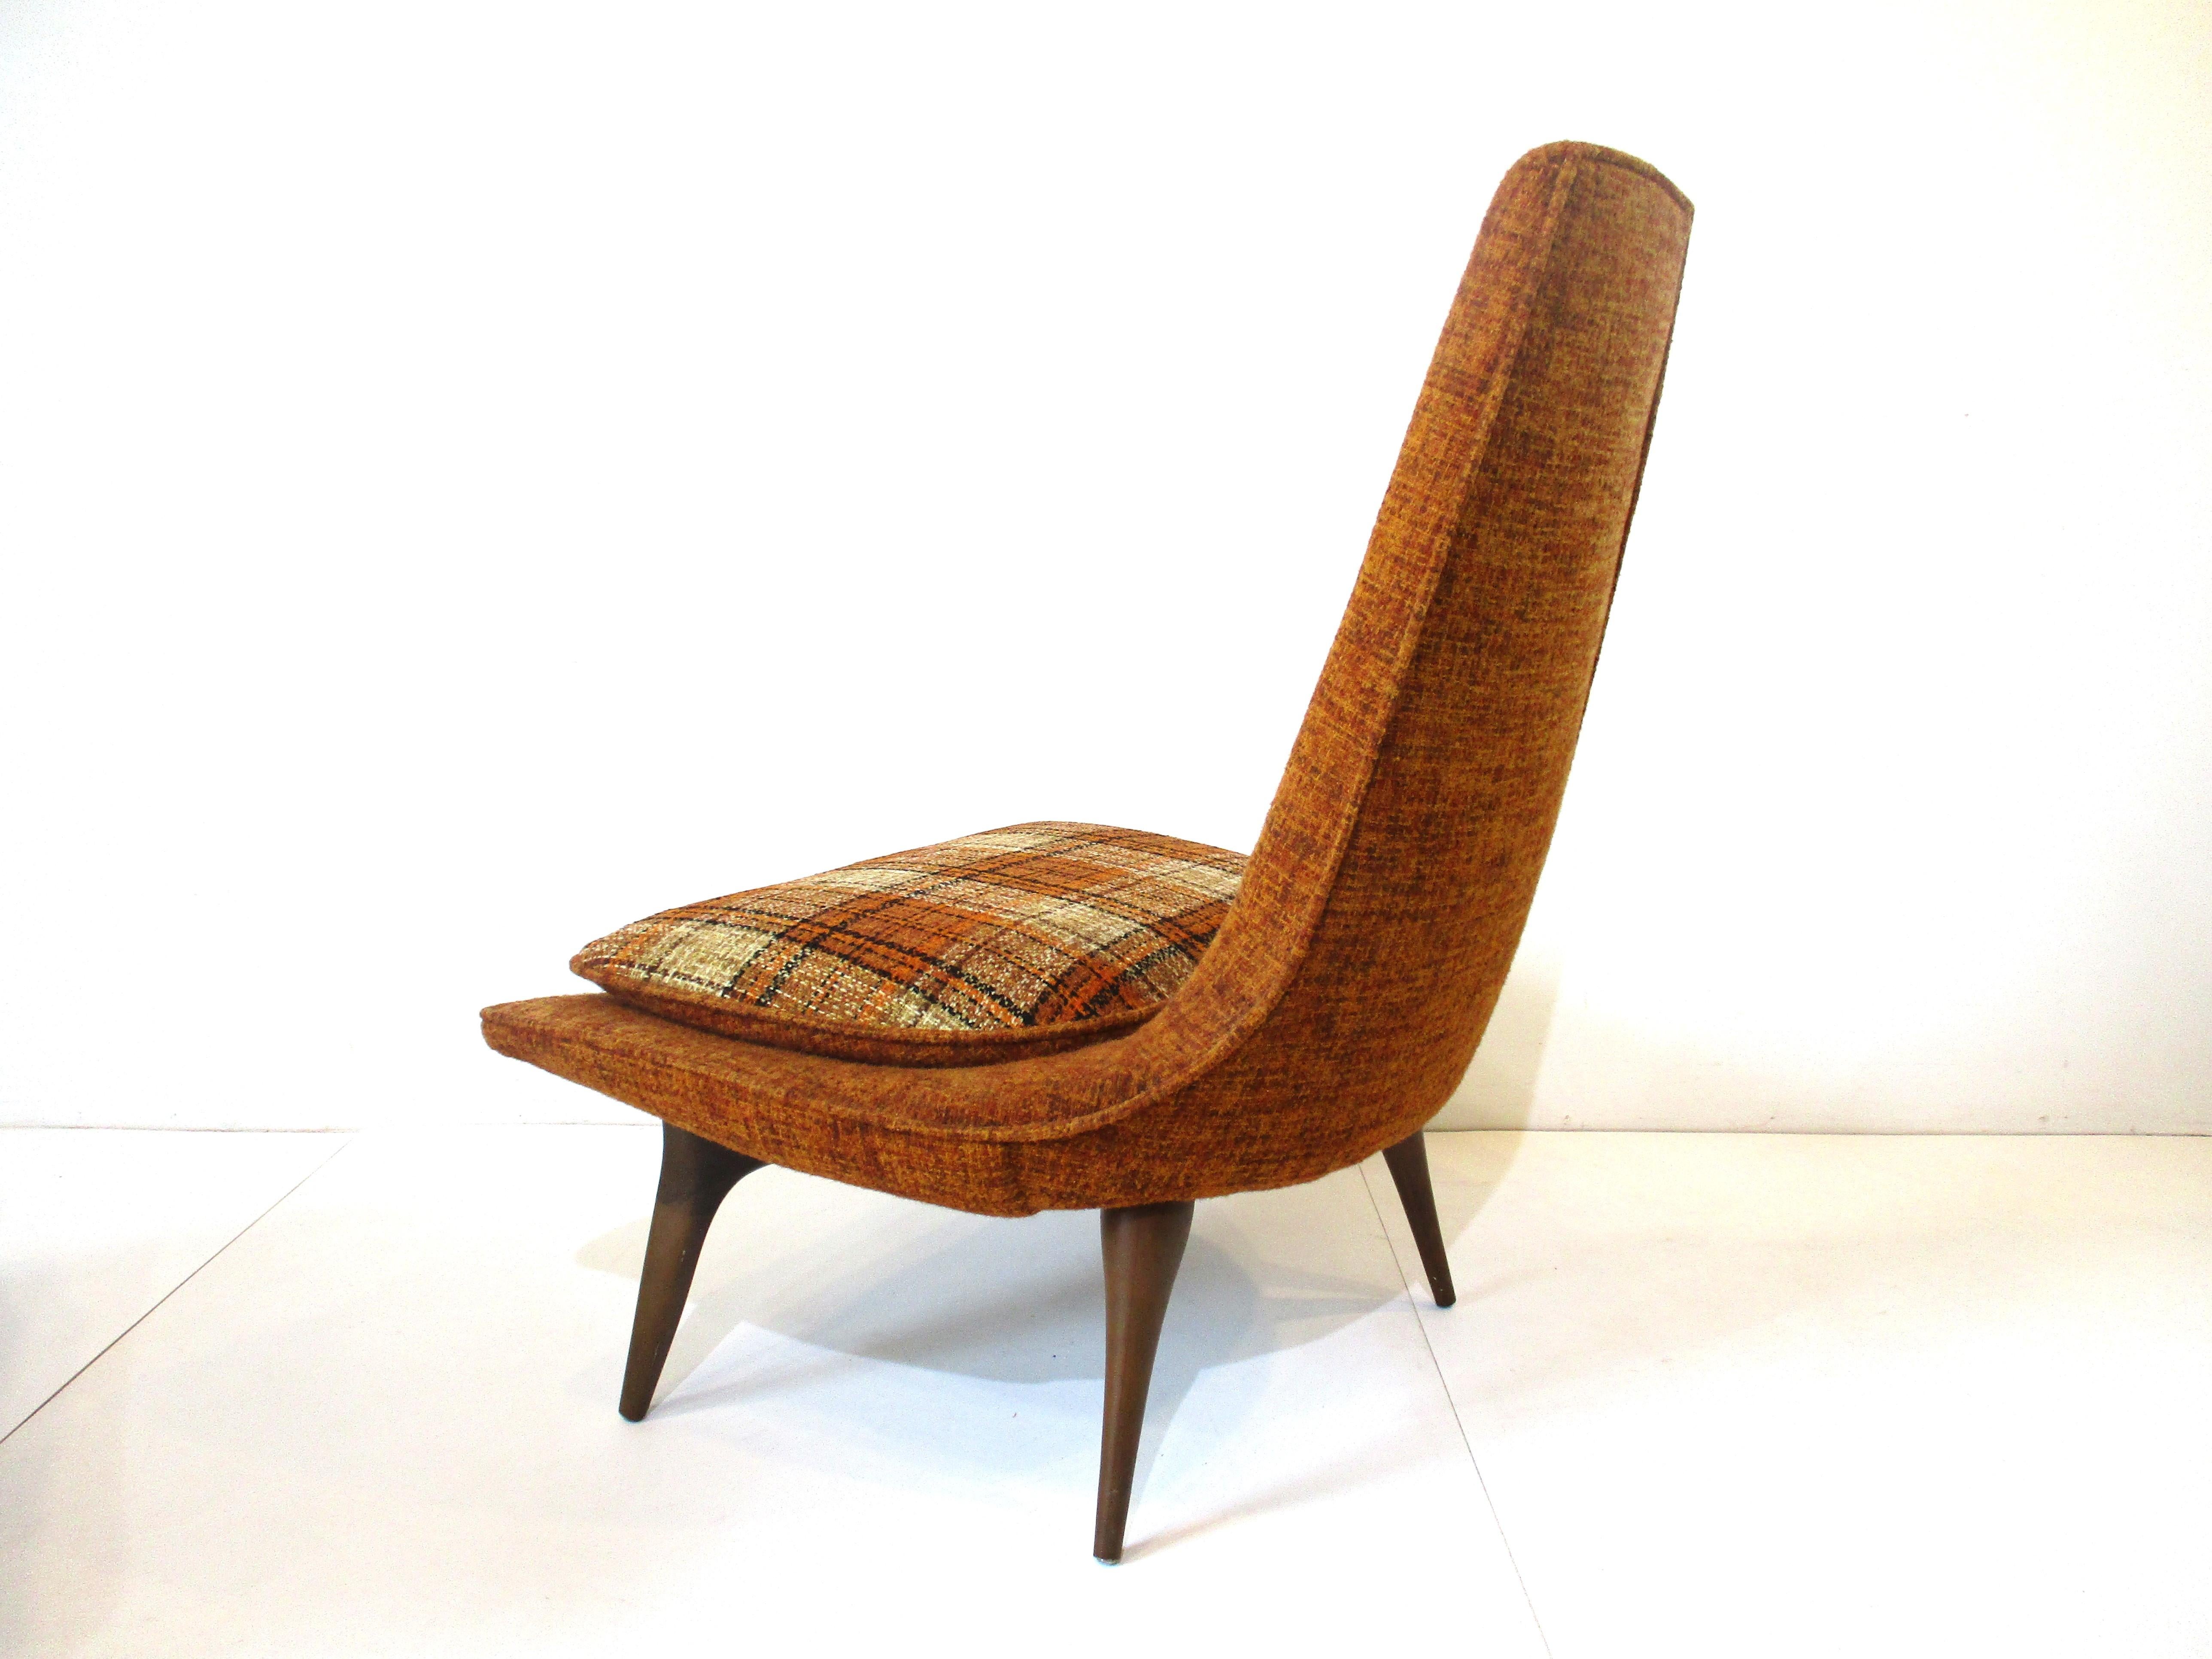 Upholstery Sculptural Midcentury High Back Slipper Lounge Chairs by Karpen of California